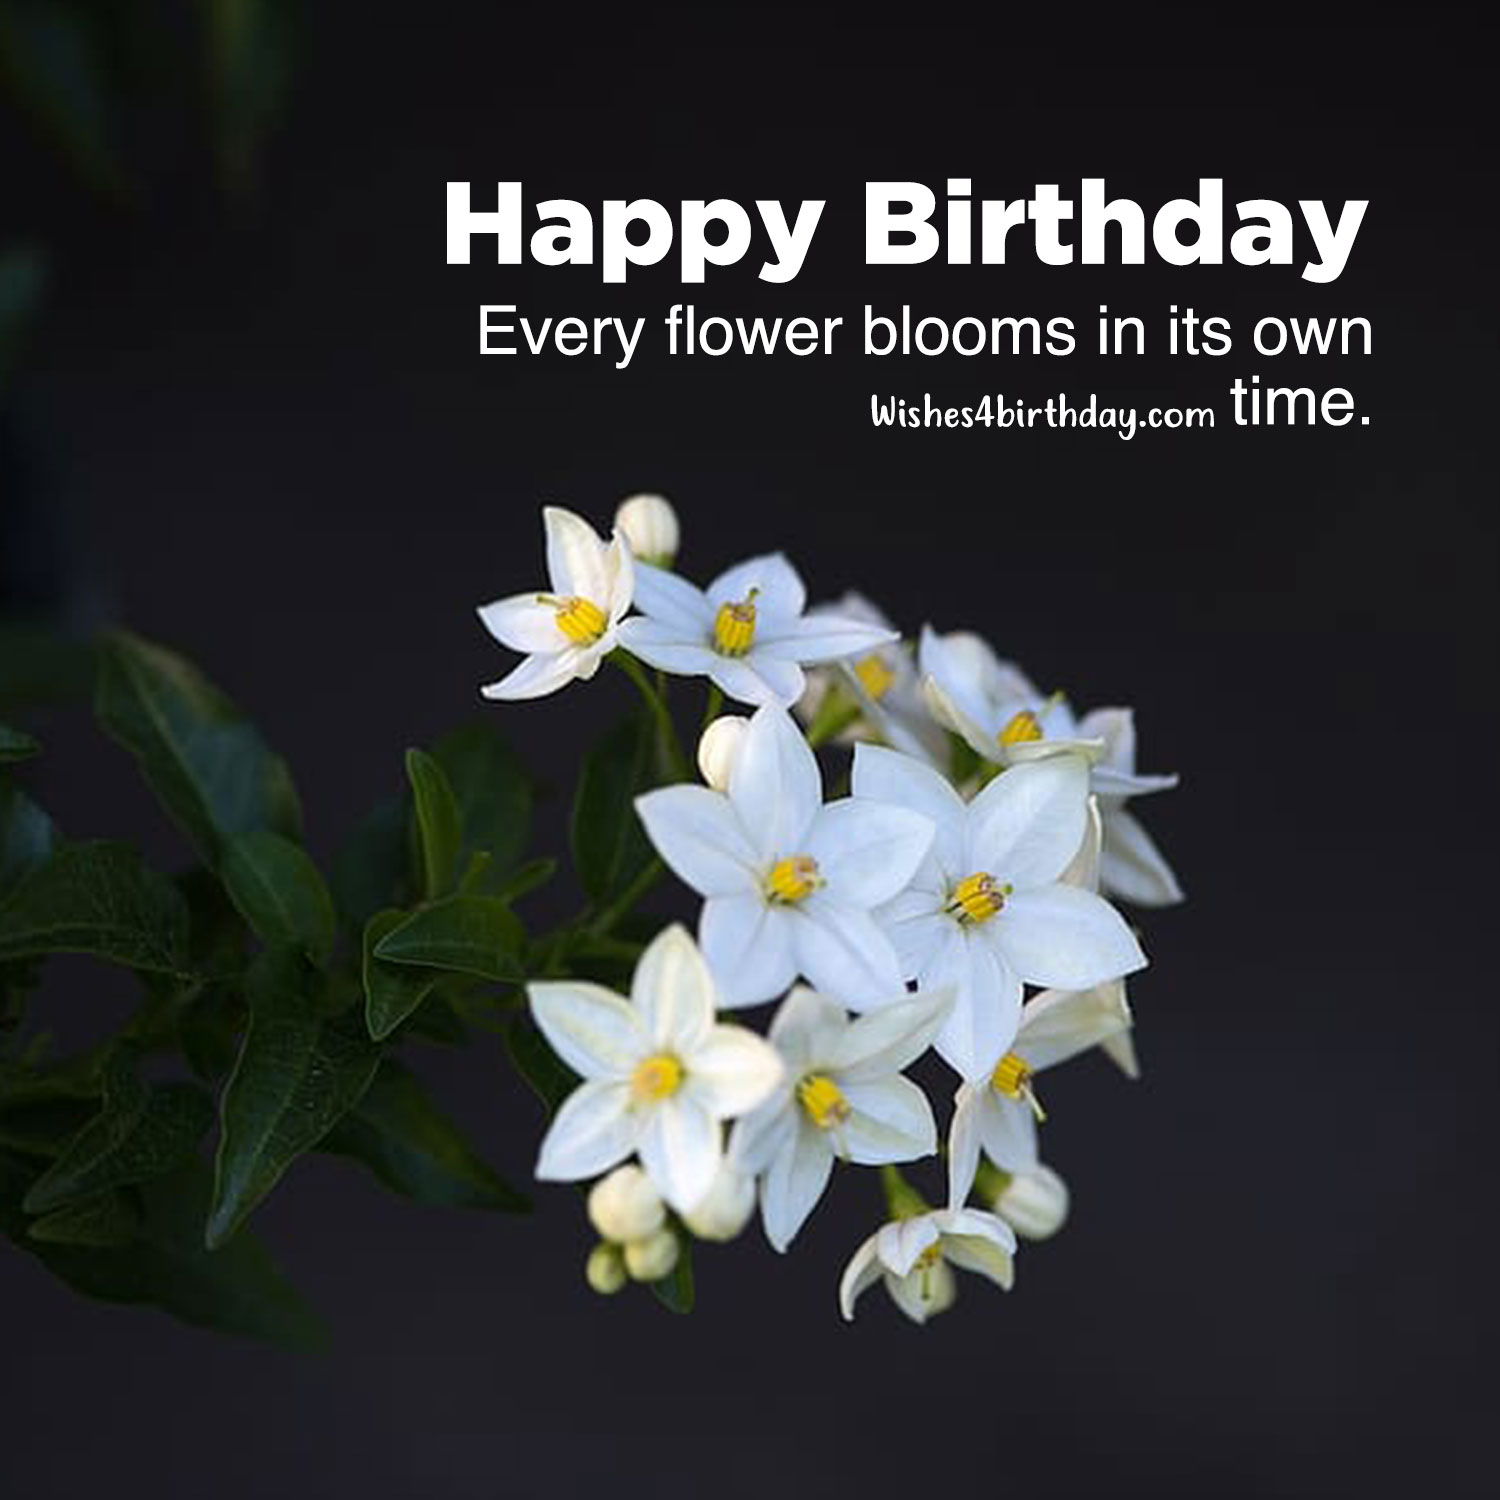 Collection of Birthday flower gifts for her - Happy ...